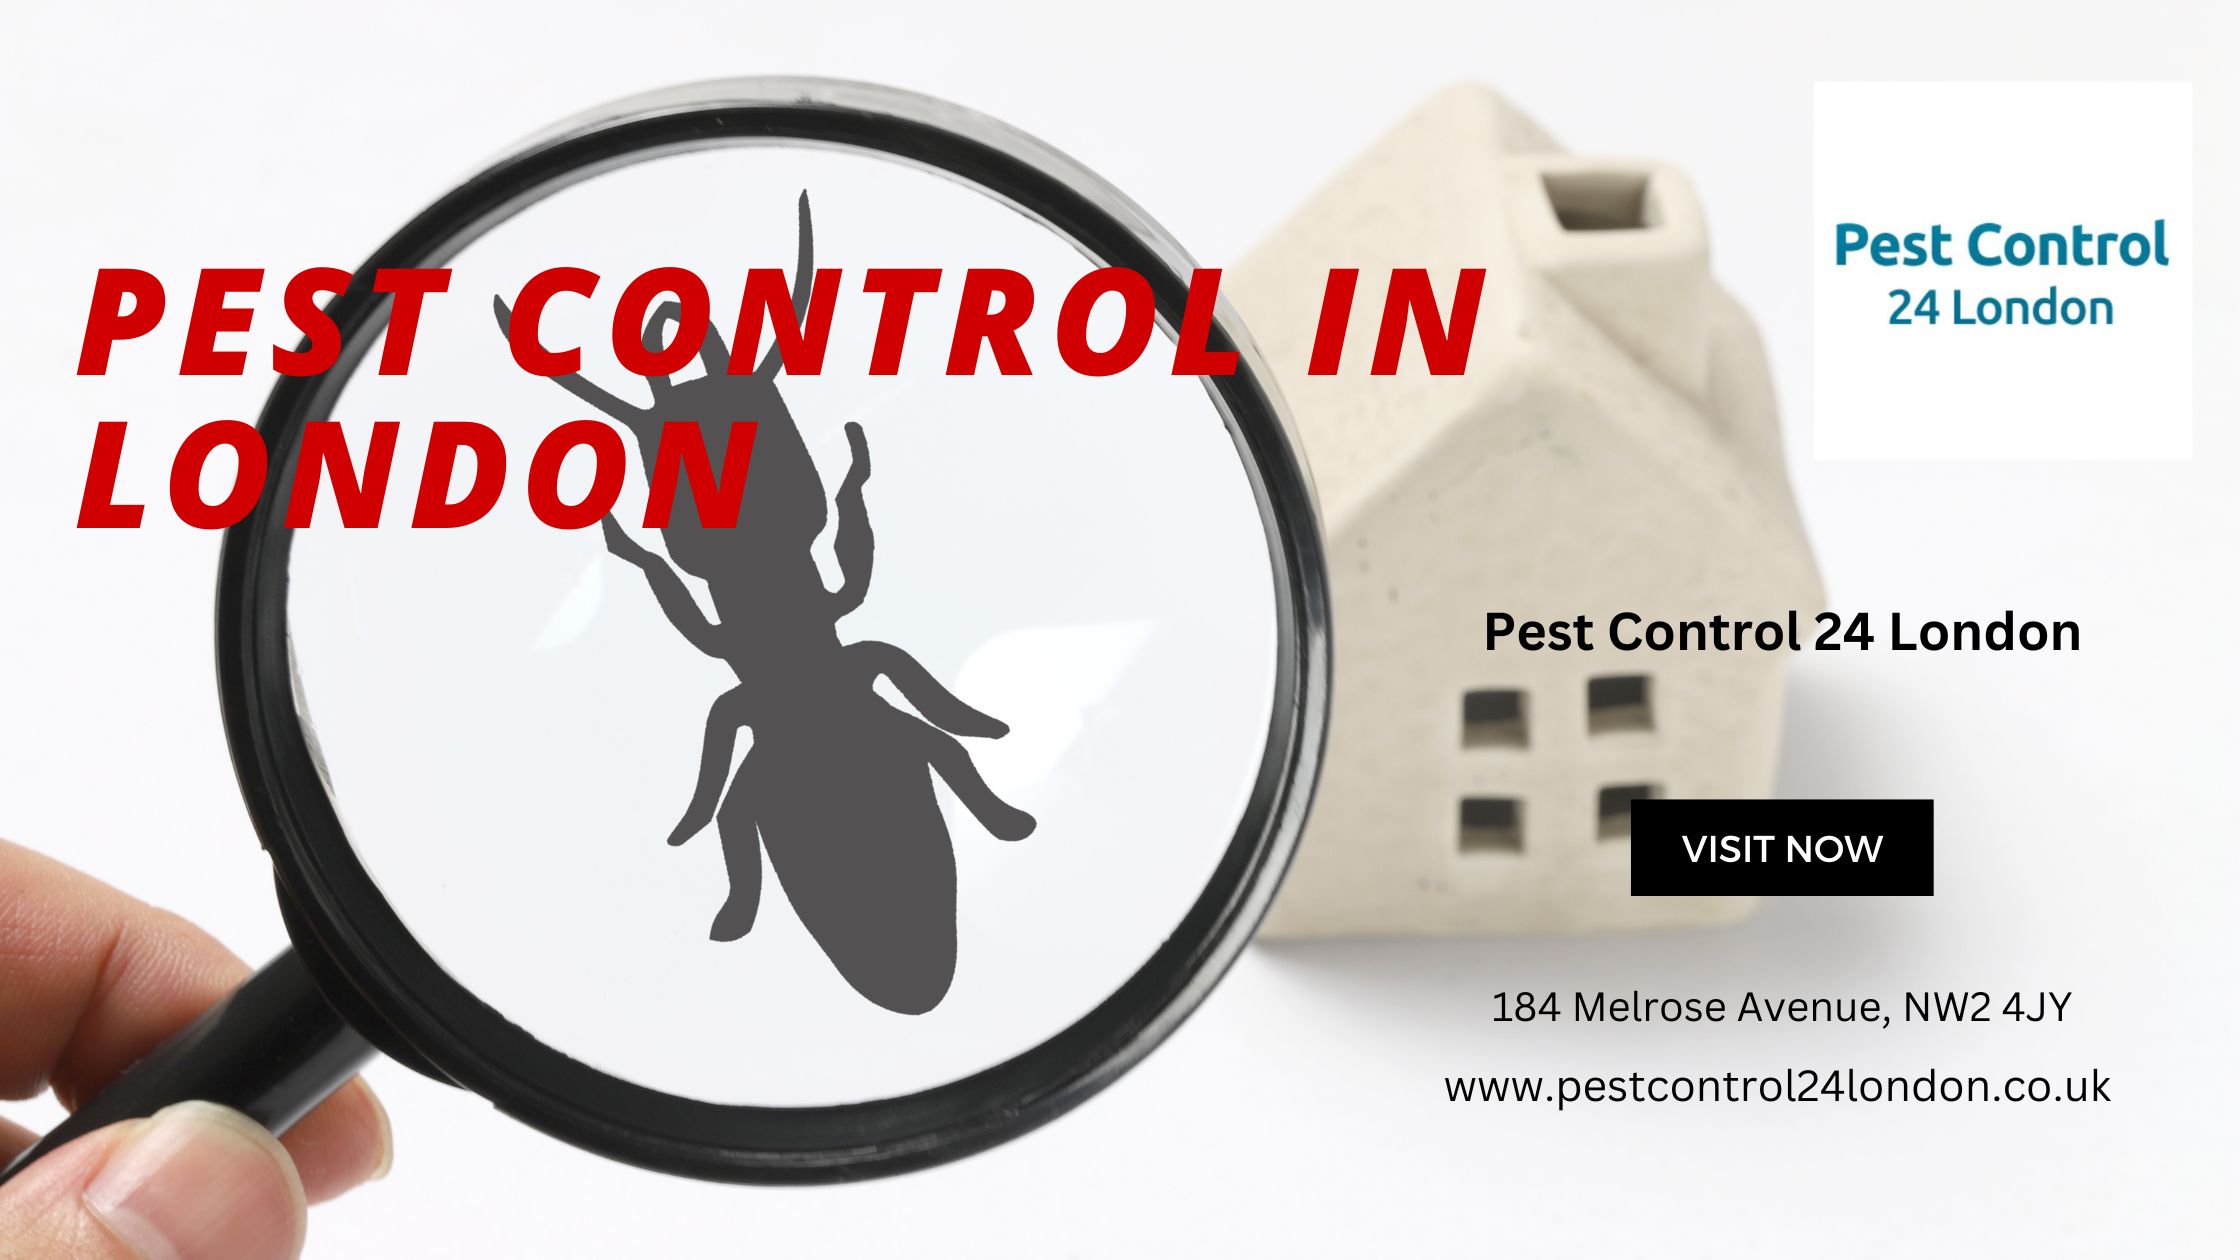 Pest Control 24 London | Expert Pest Control in London - Emergency Services Available - Bloglabcity.com